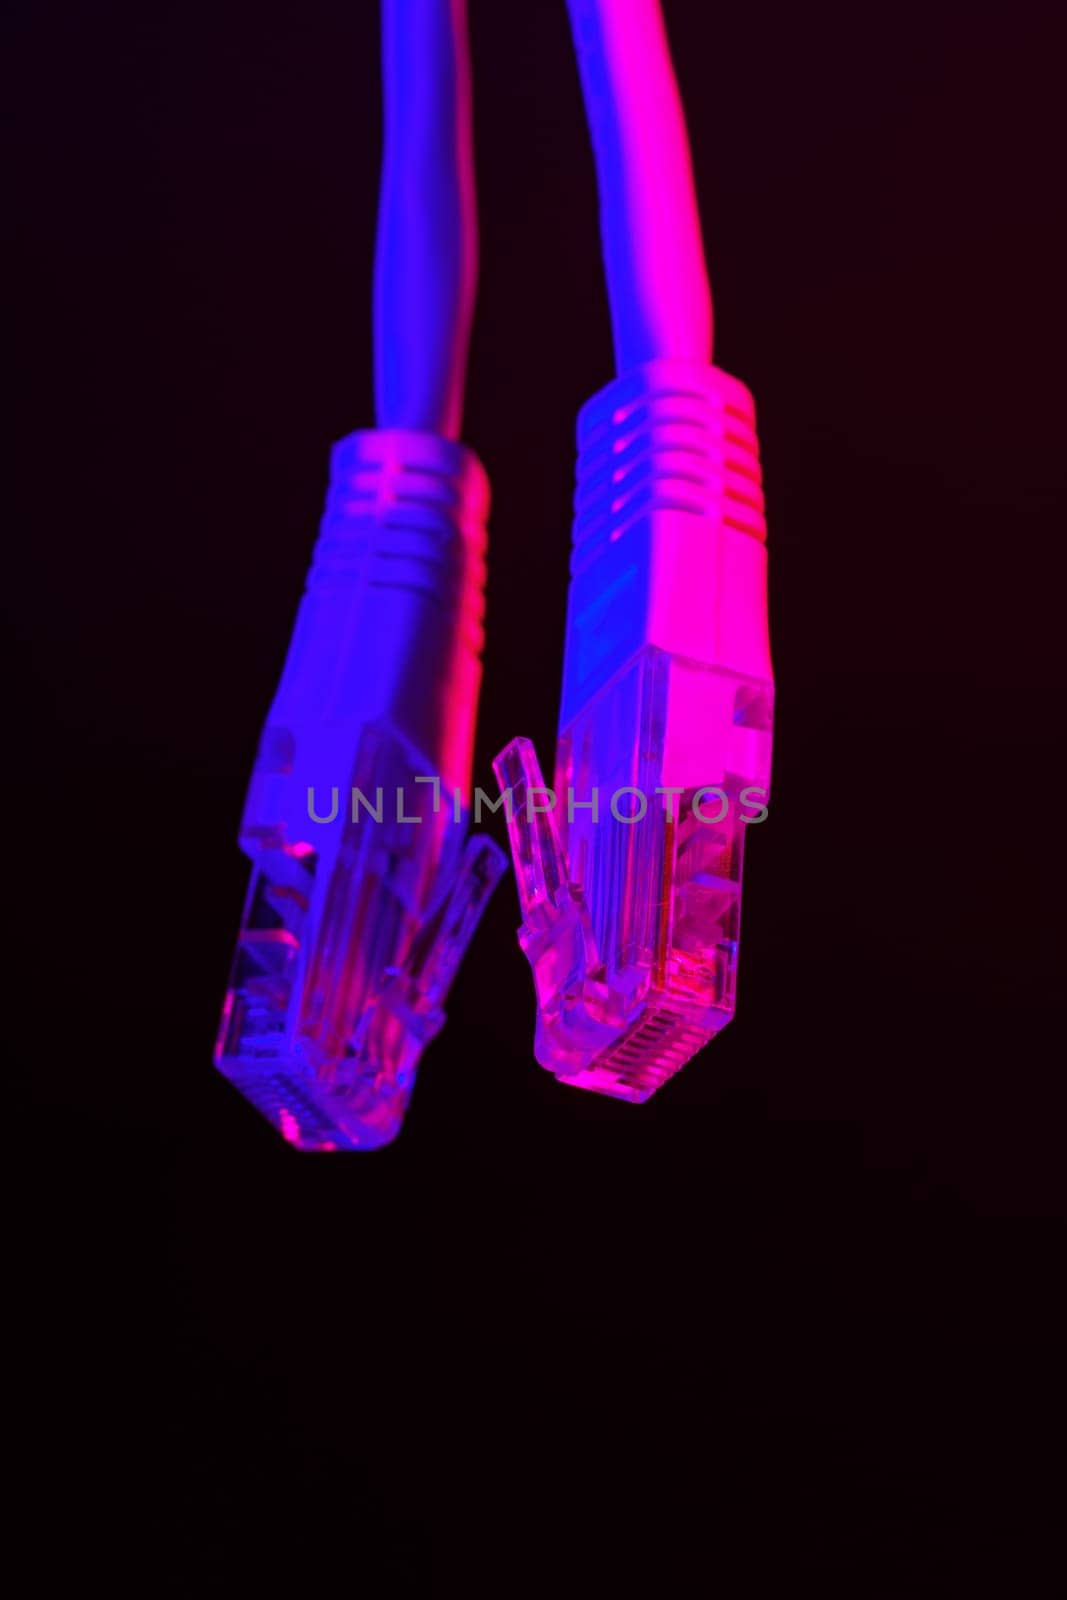 Modern technology network cable in neon light close up